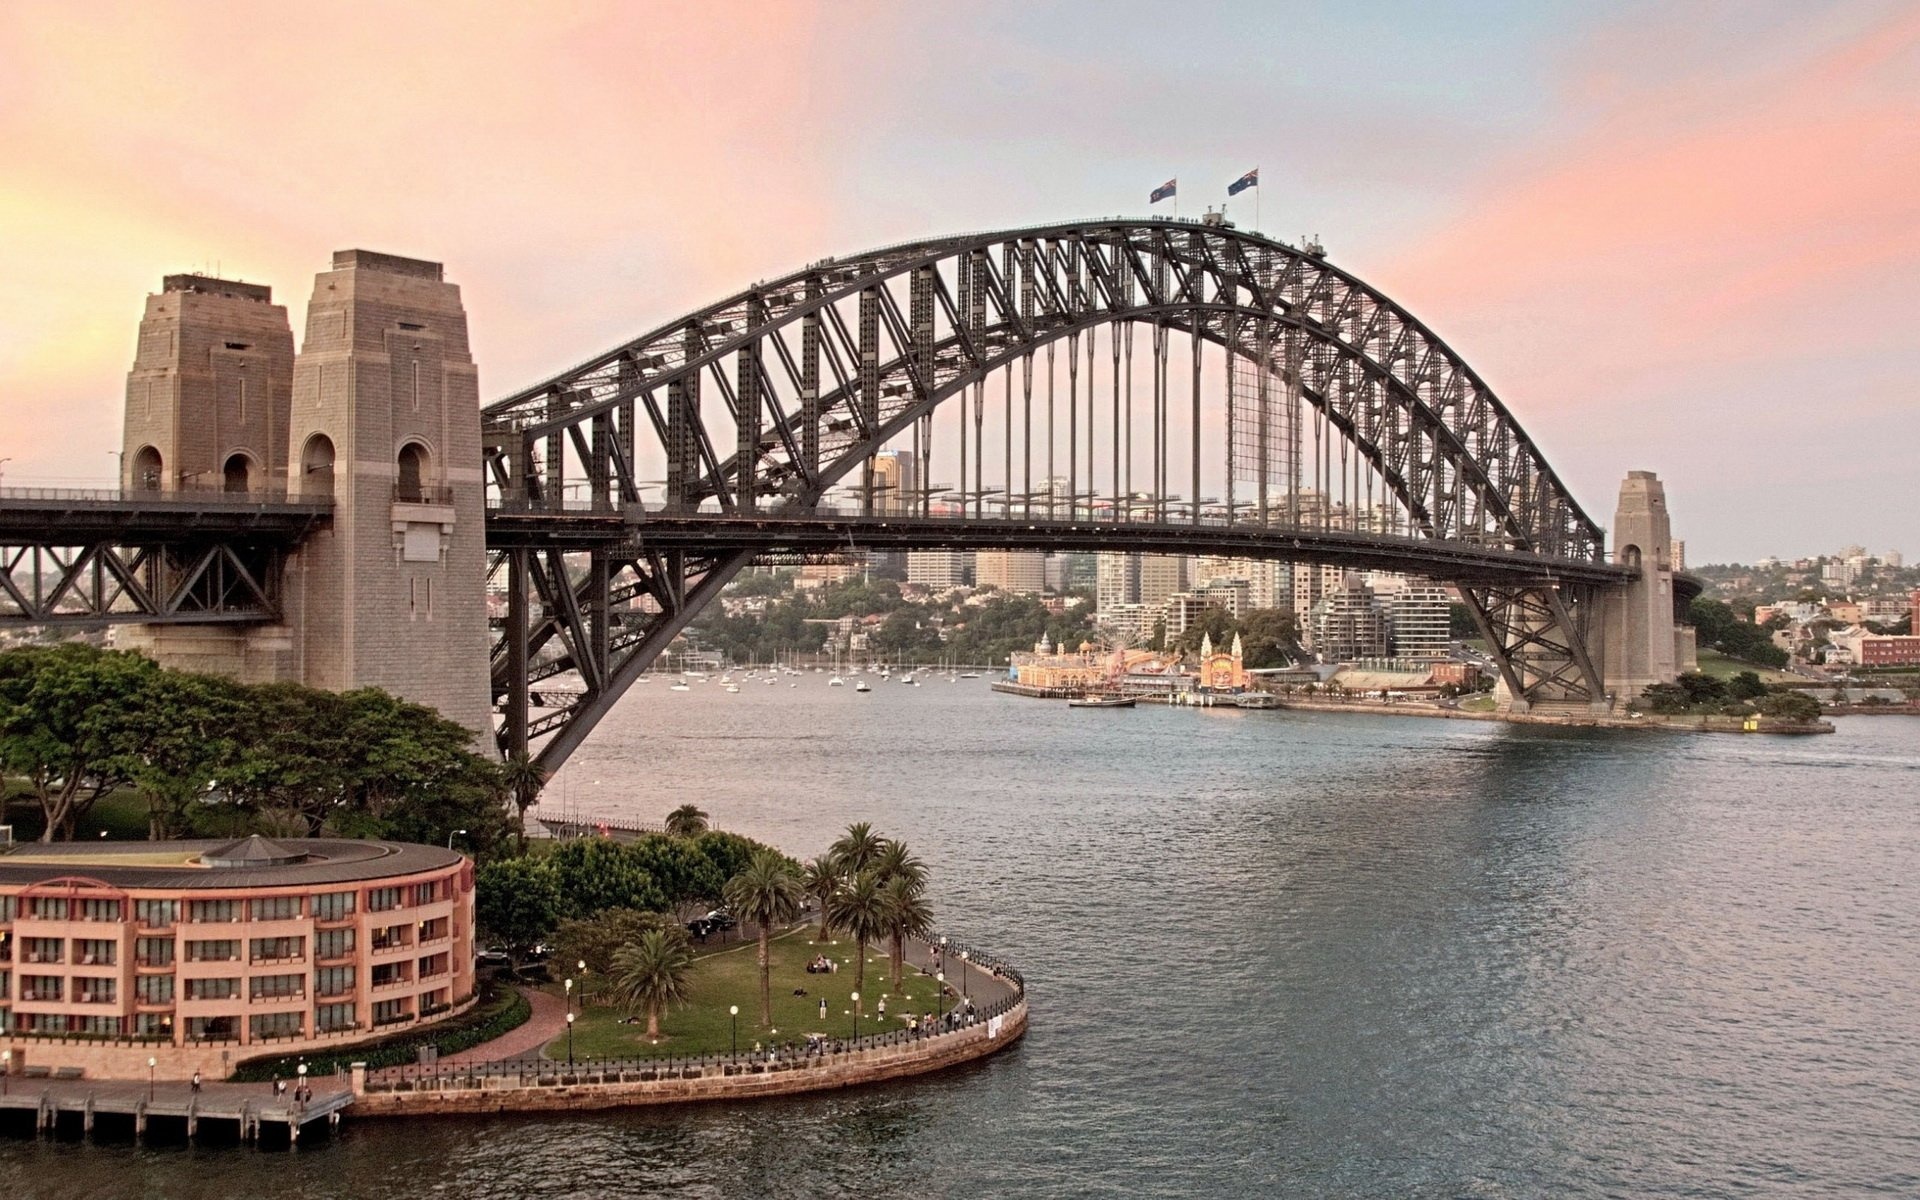 View from Milsons Point, Desktop wallpapers, Background images, 1920x1200 HD Desktop